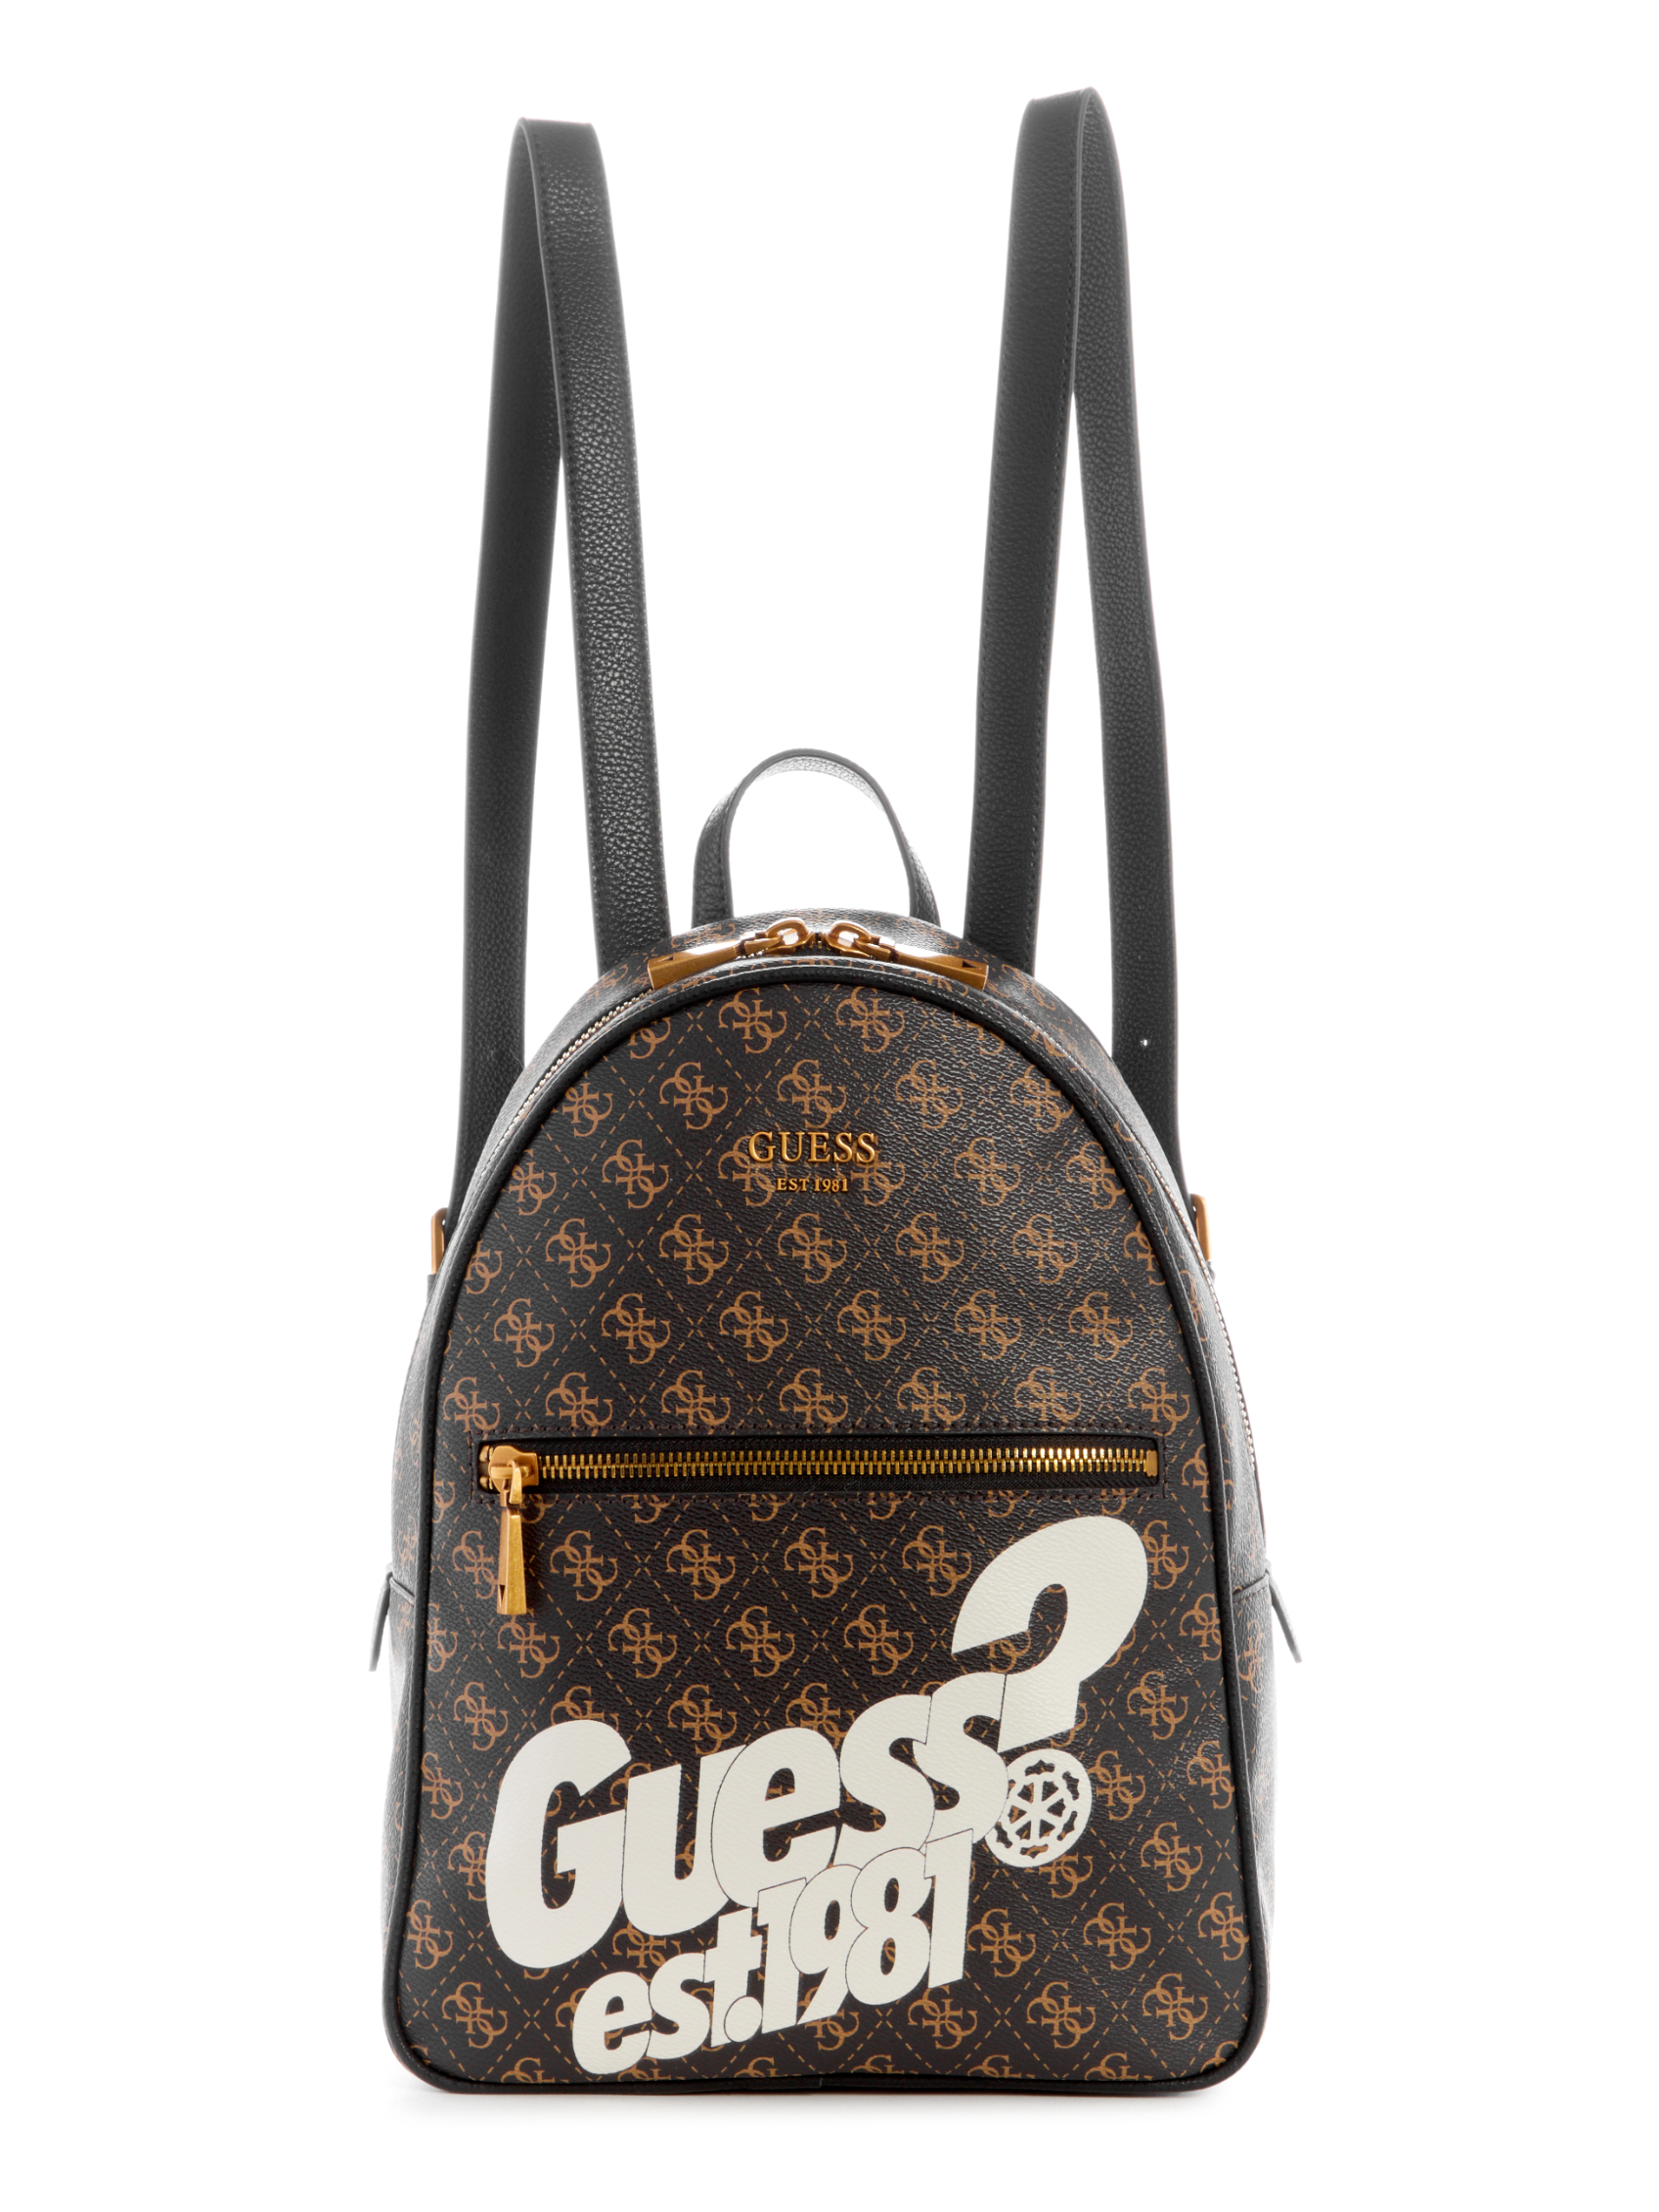 VIKKY BACKPACK | Guess Philippines